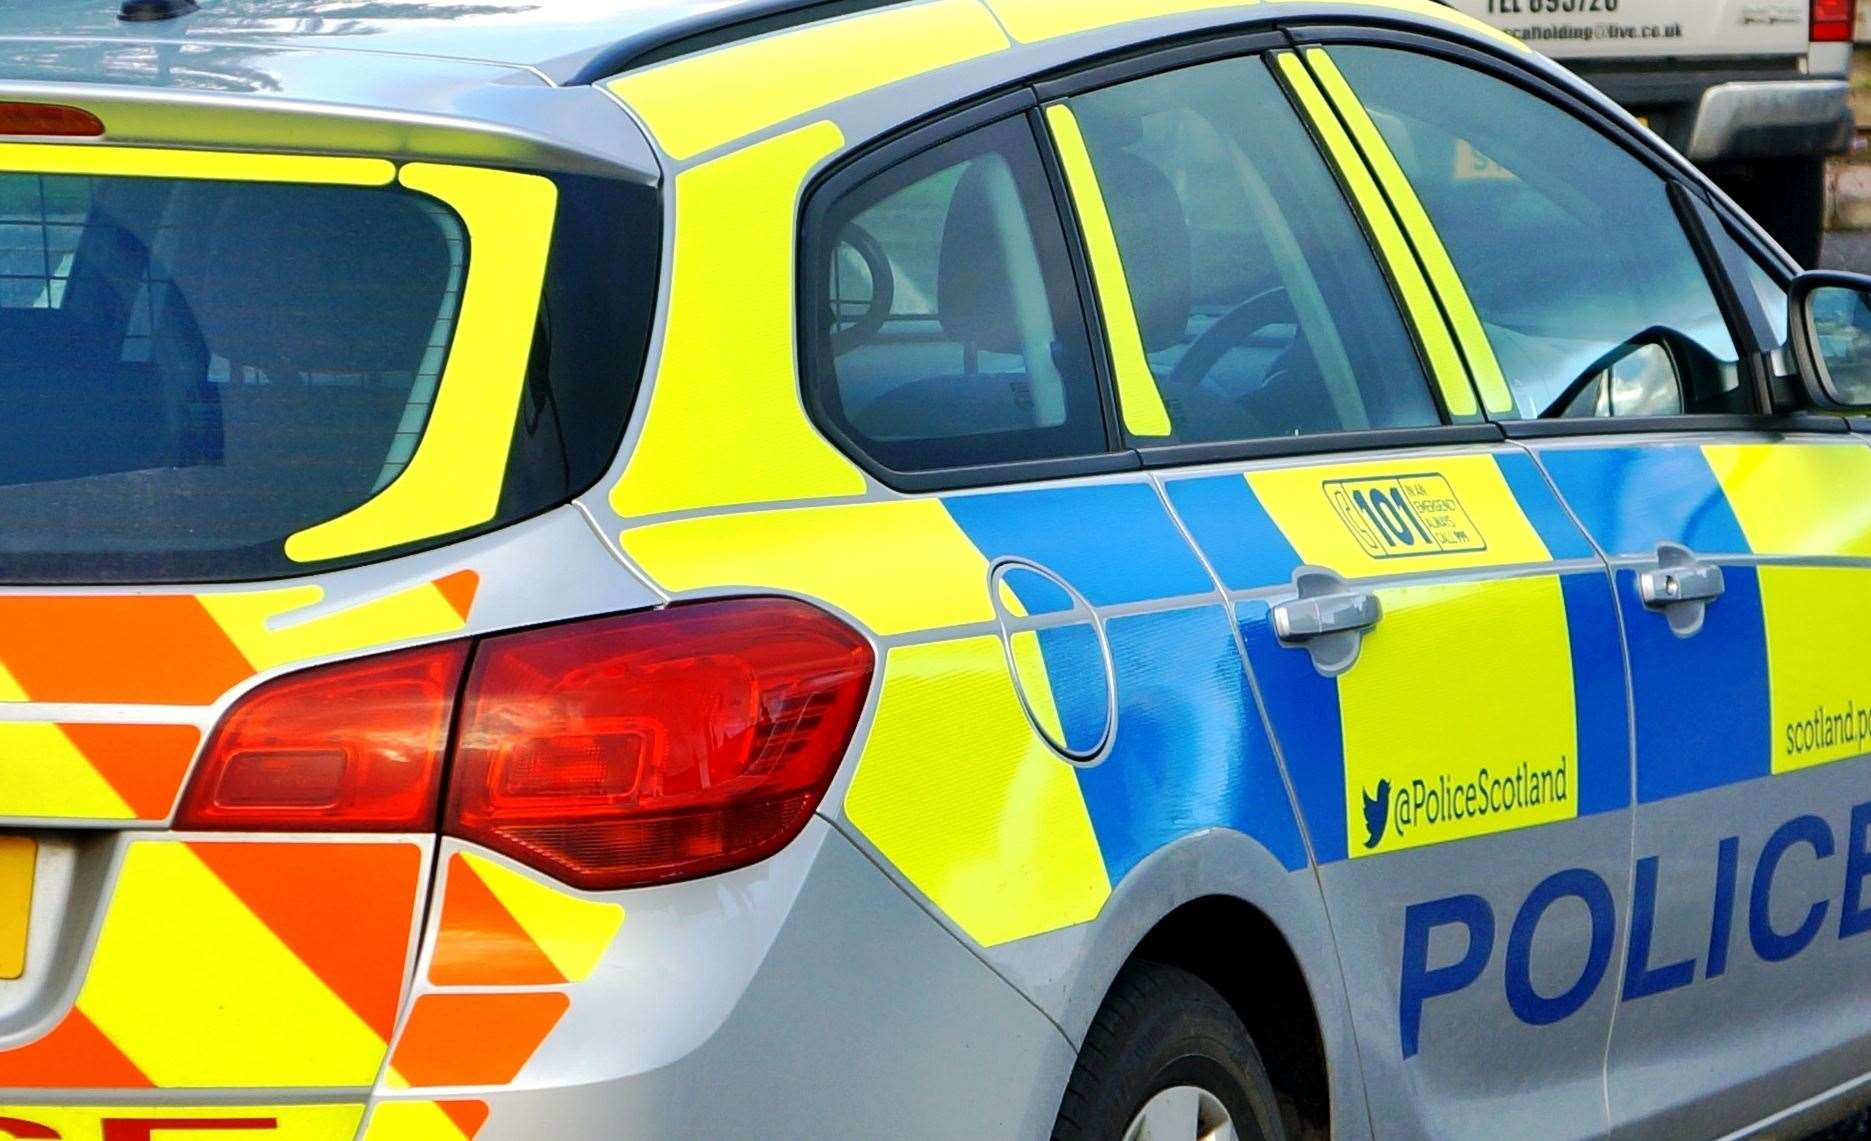 Police Scotland are investigating the circumstances surrounding the death